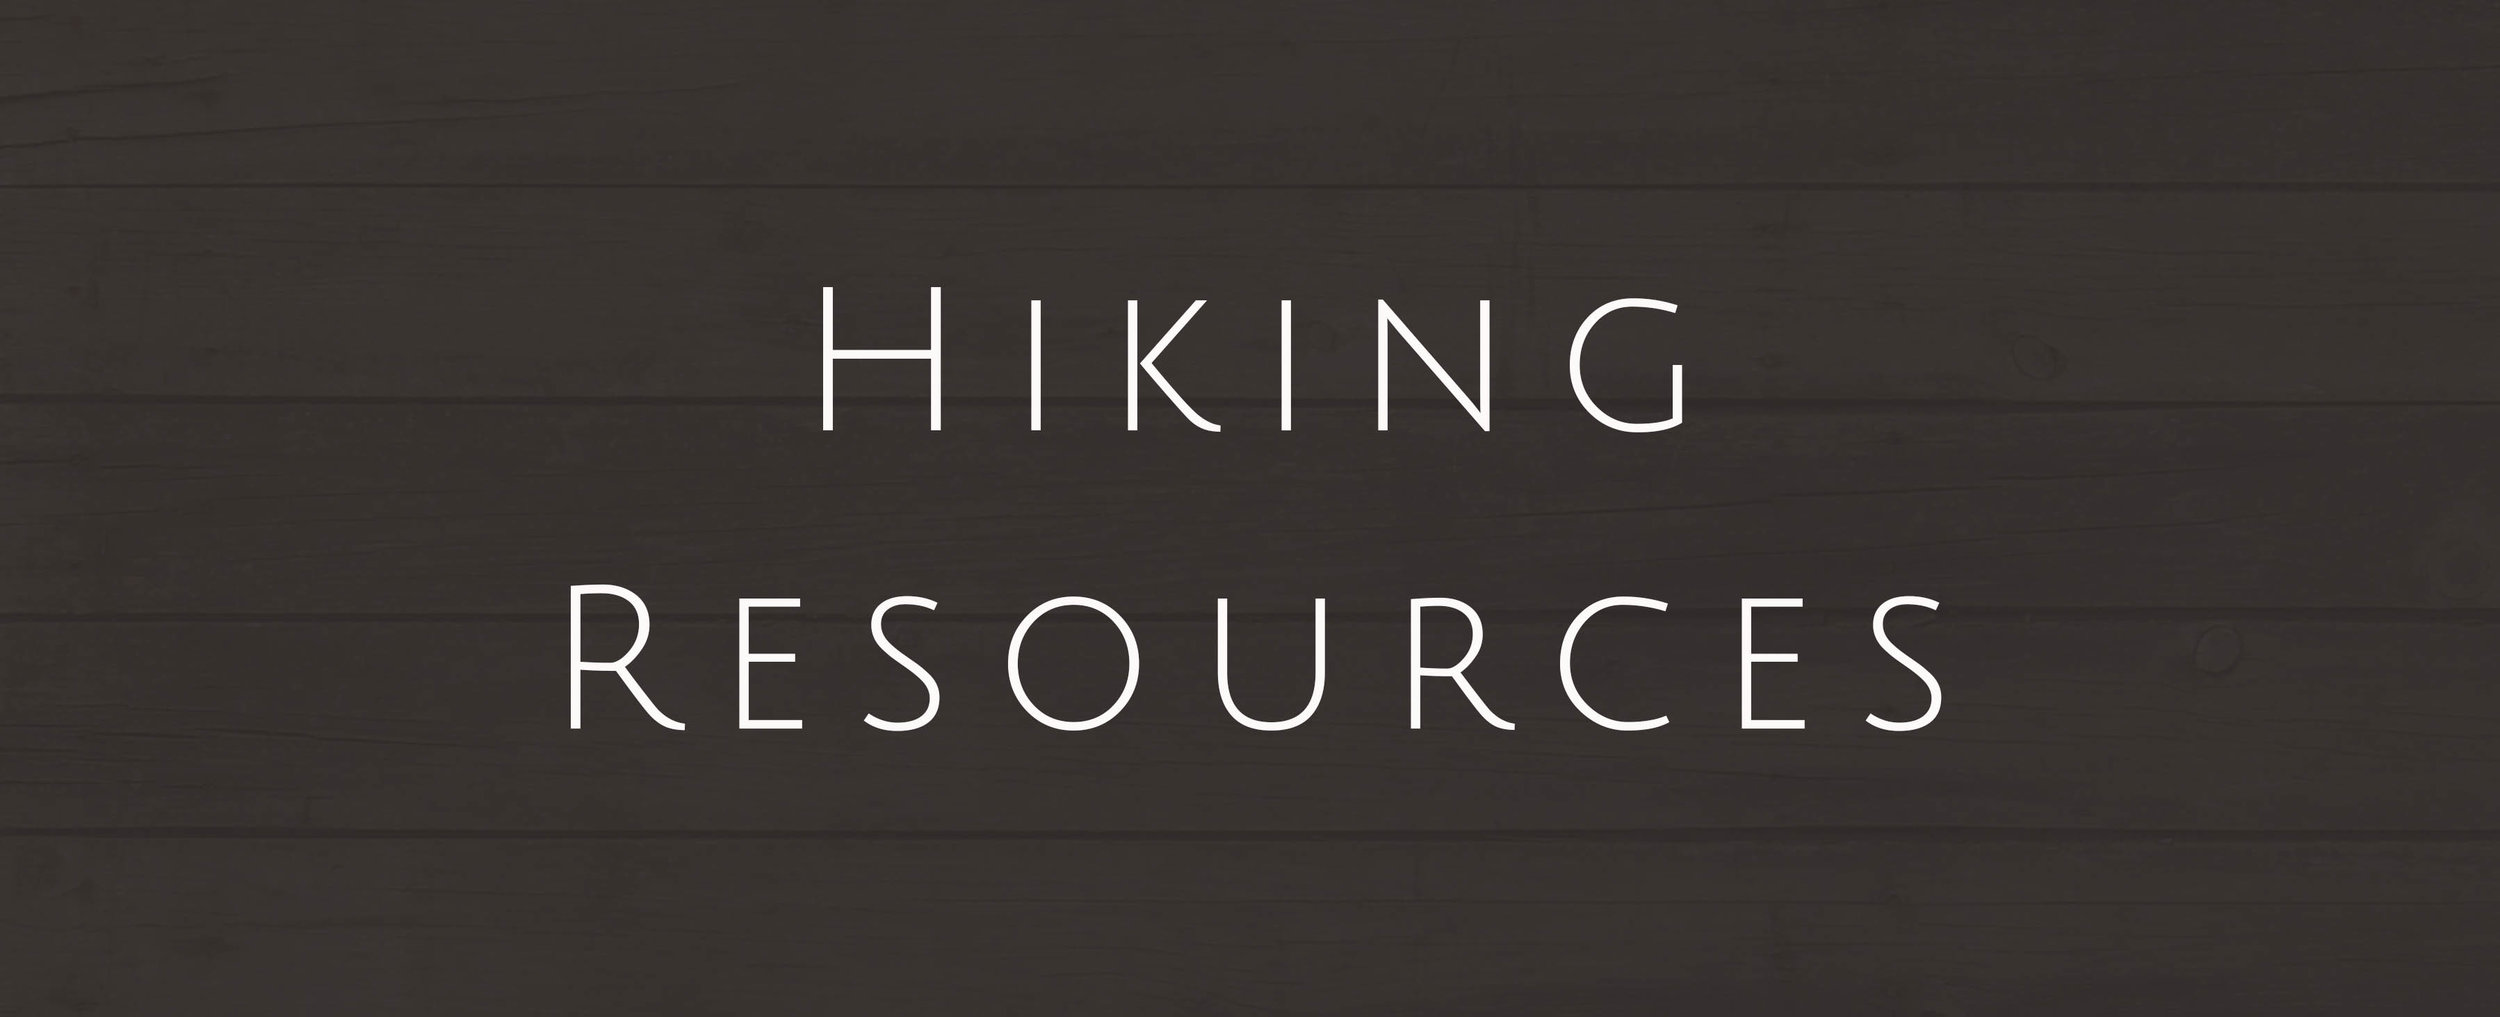 All - Hiking Resources.jpg